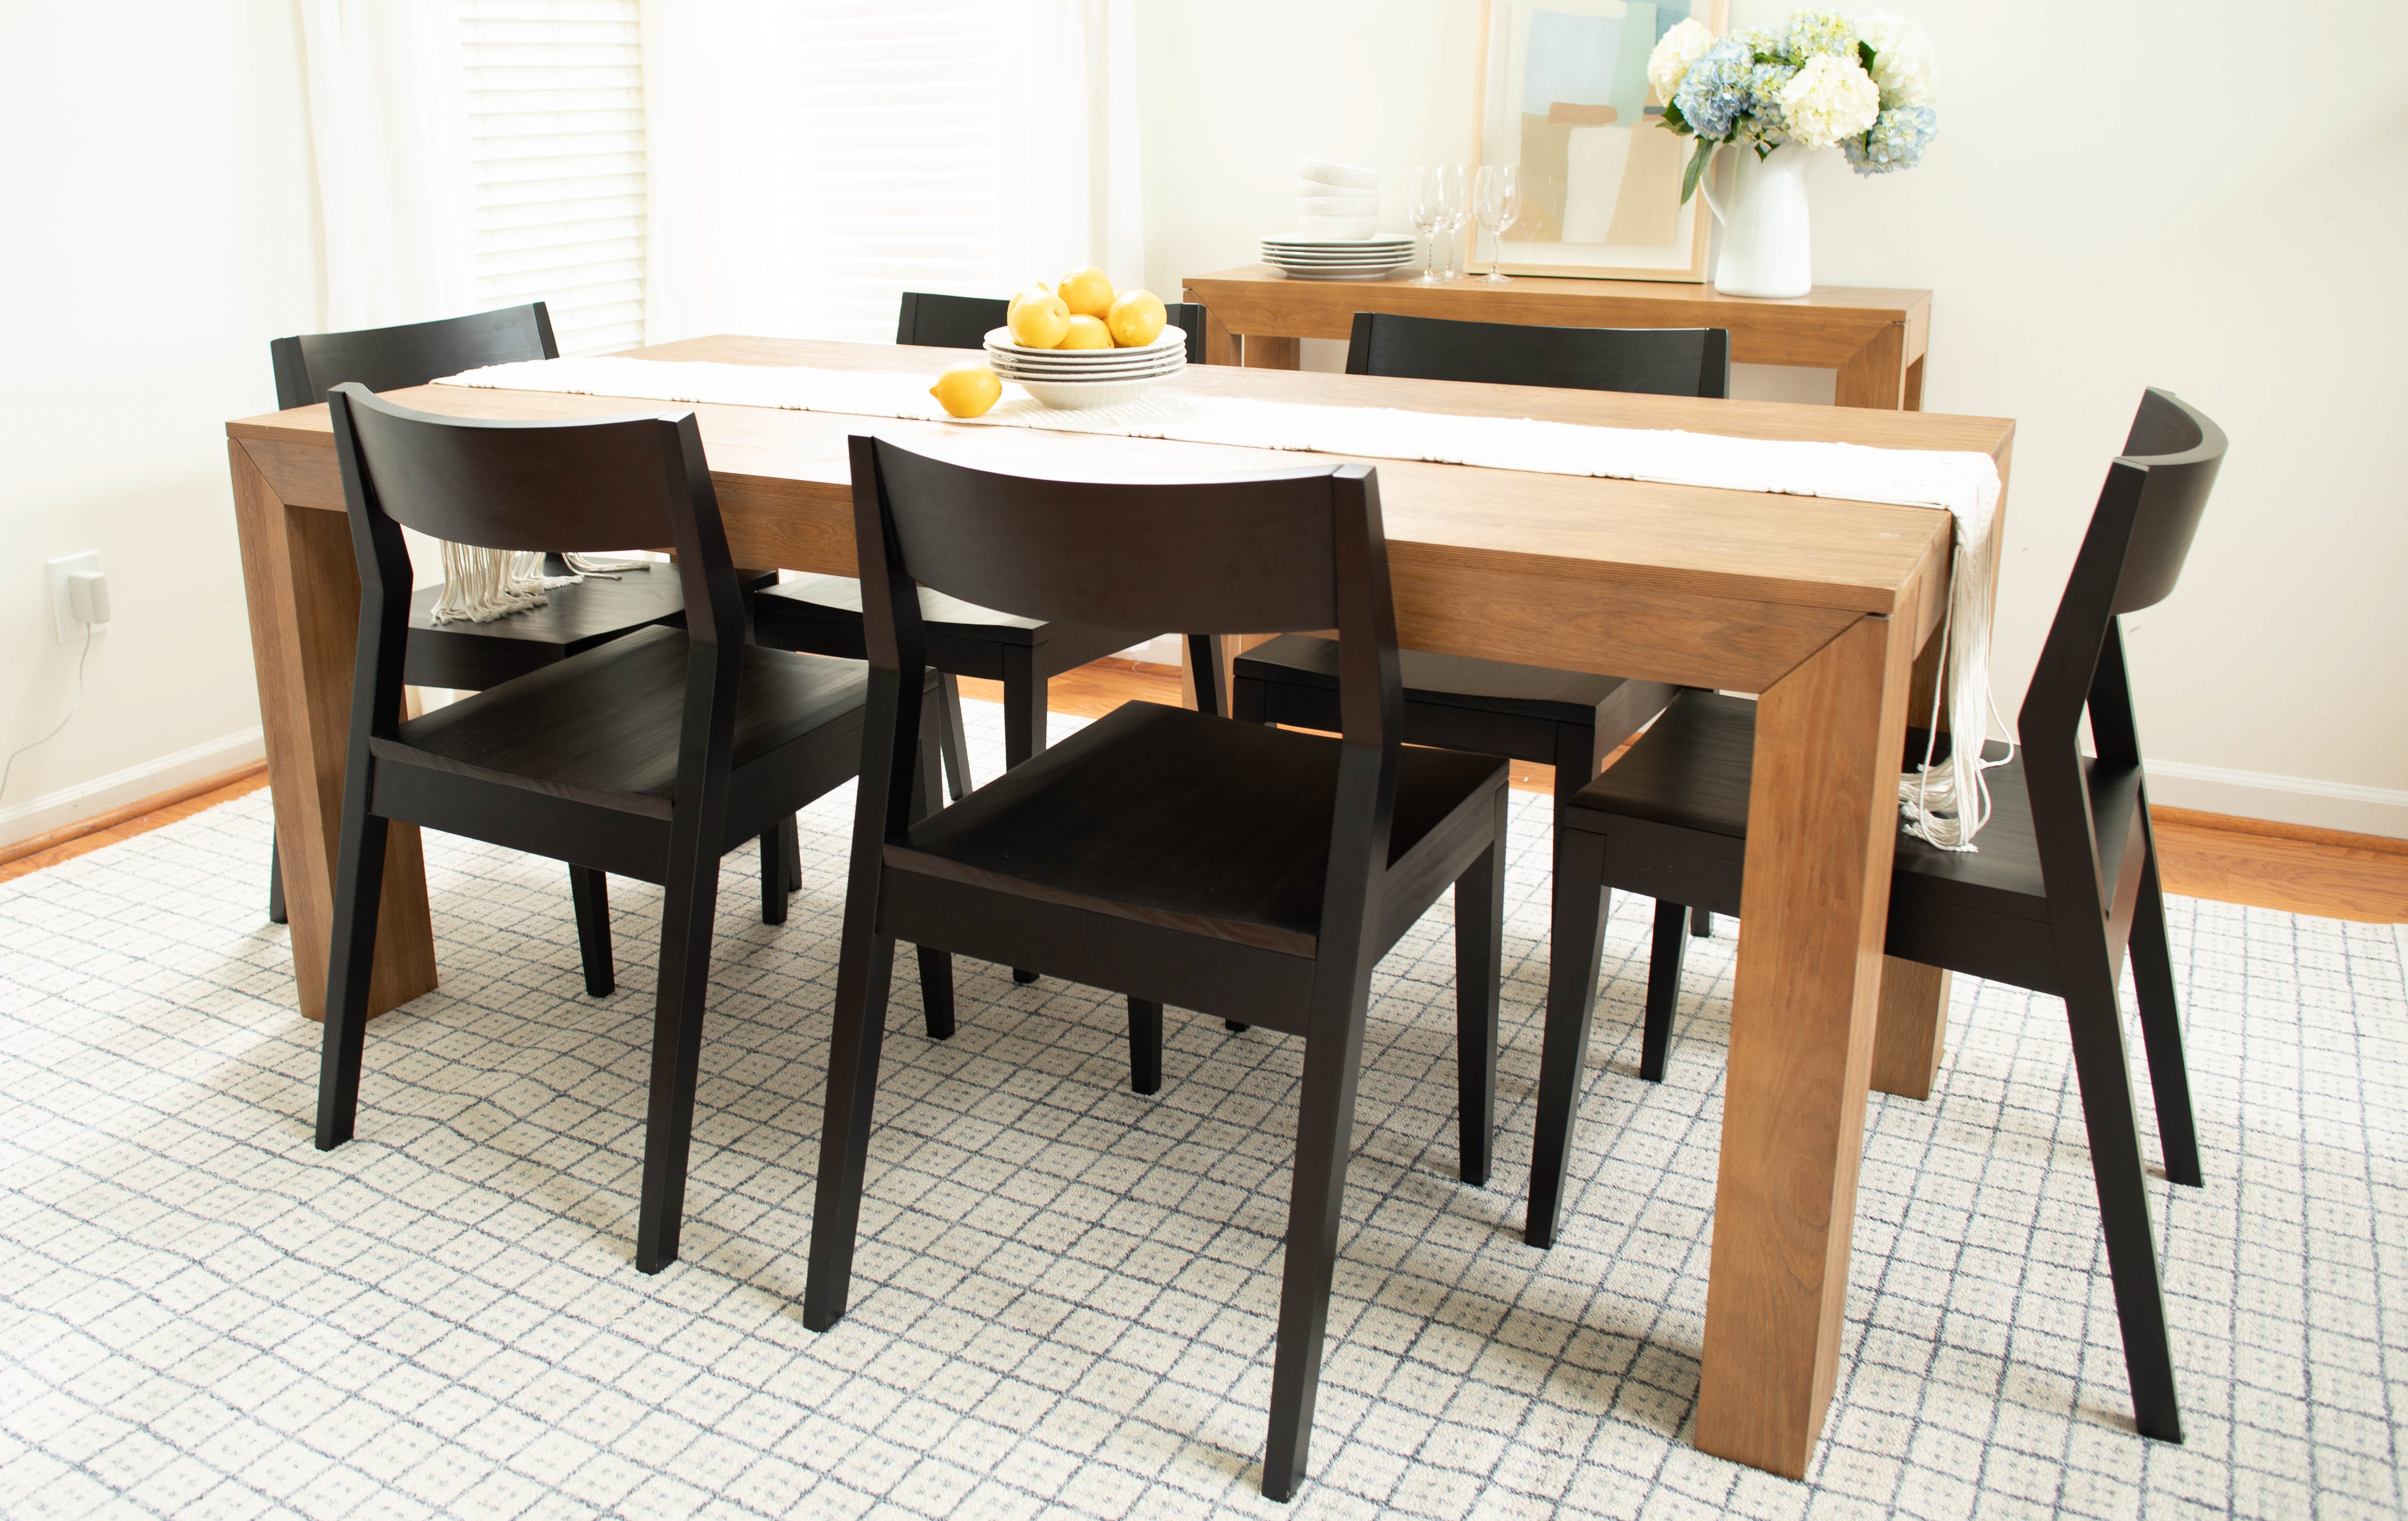 Modern dining table in pecan with solid wood black dining chairs, rug, table runner, lemon centerpiece, and decorative flowers